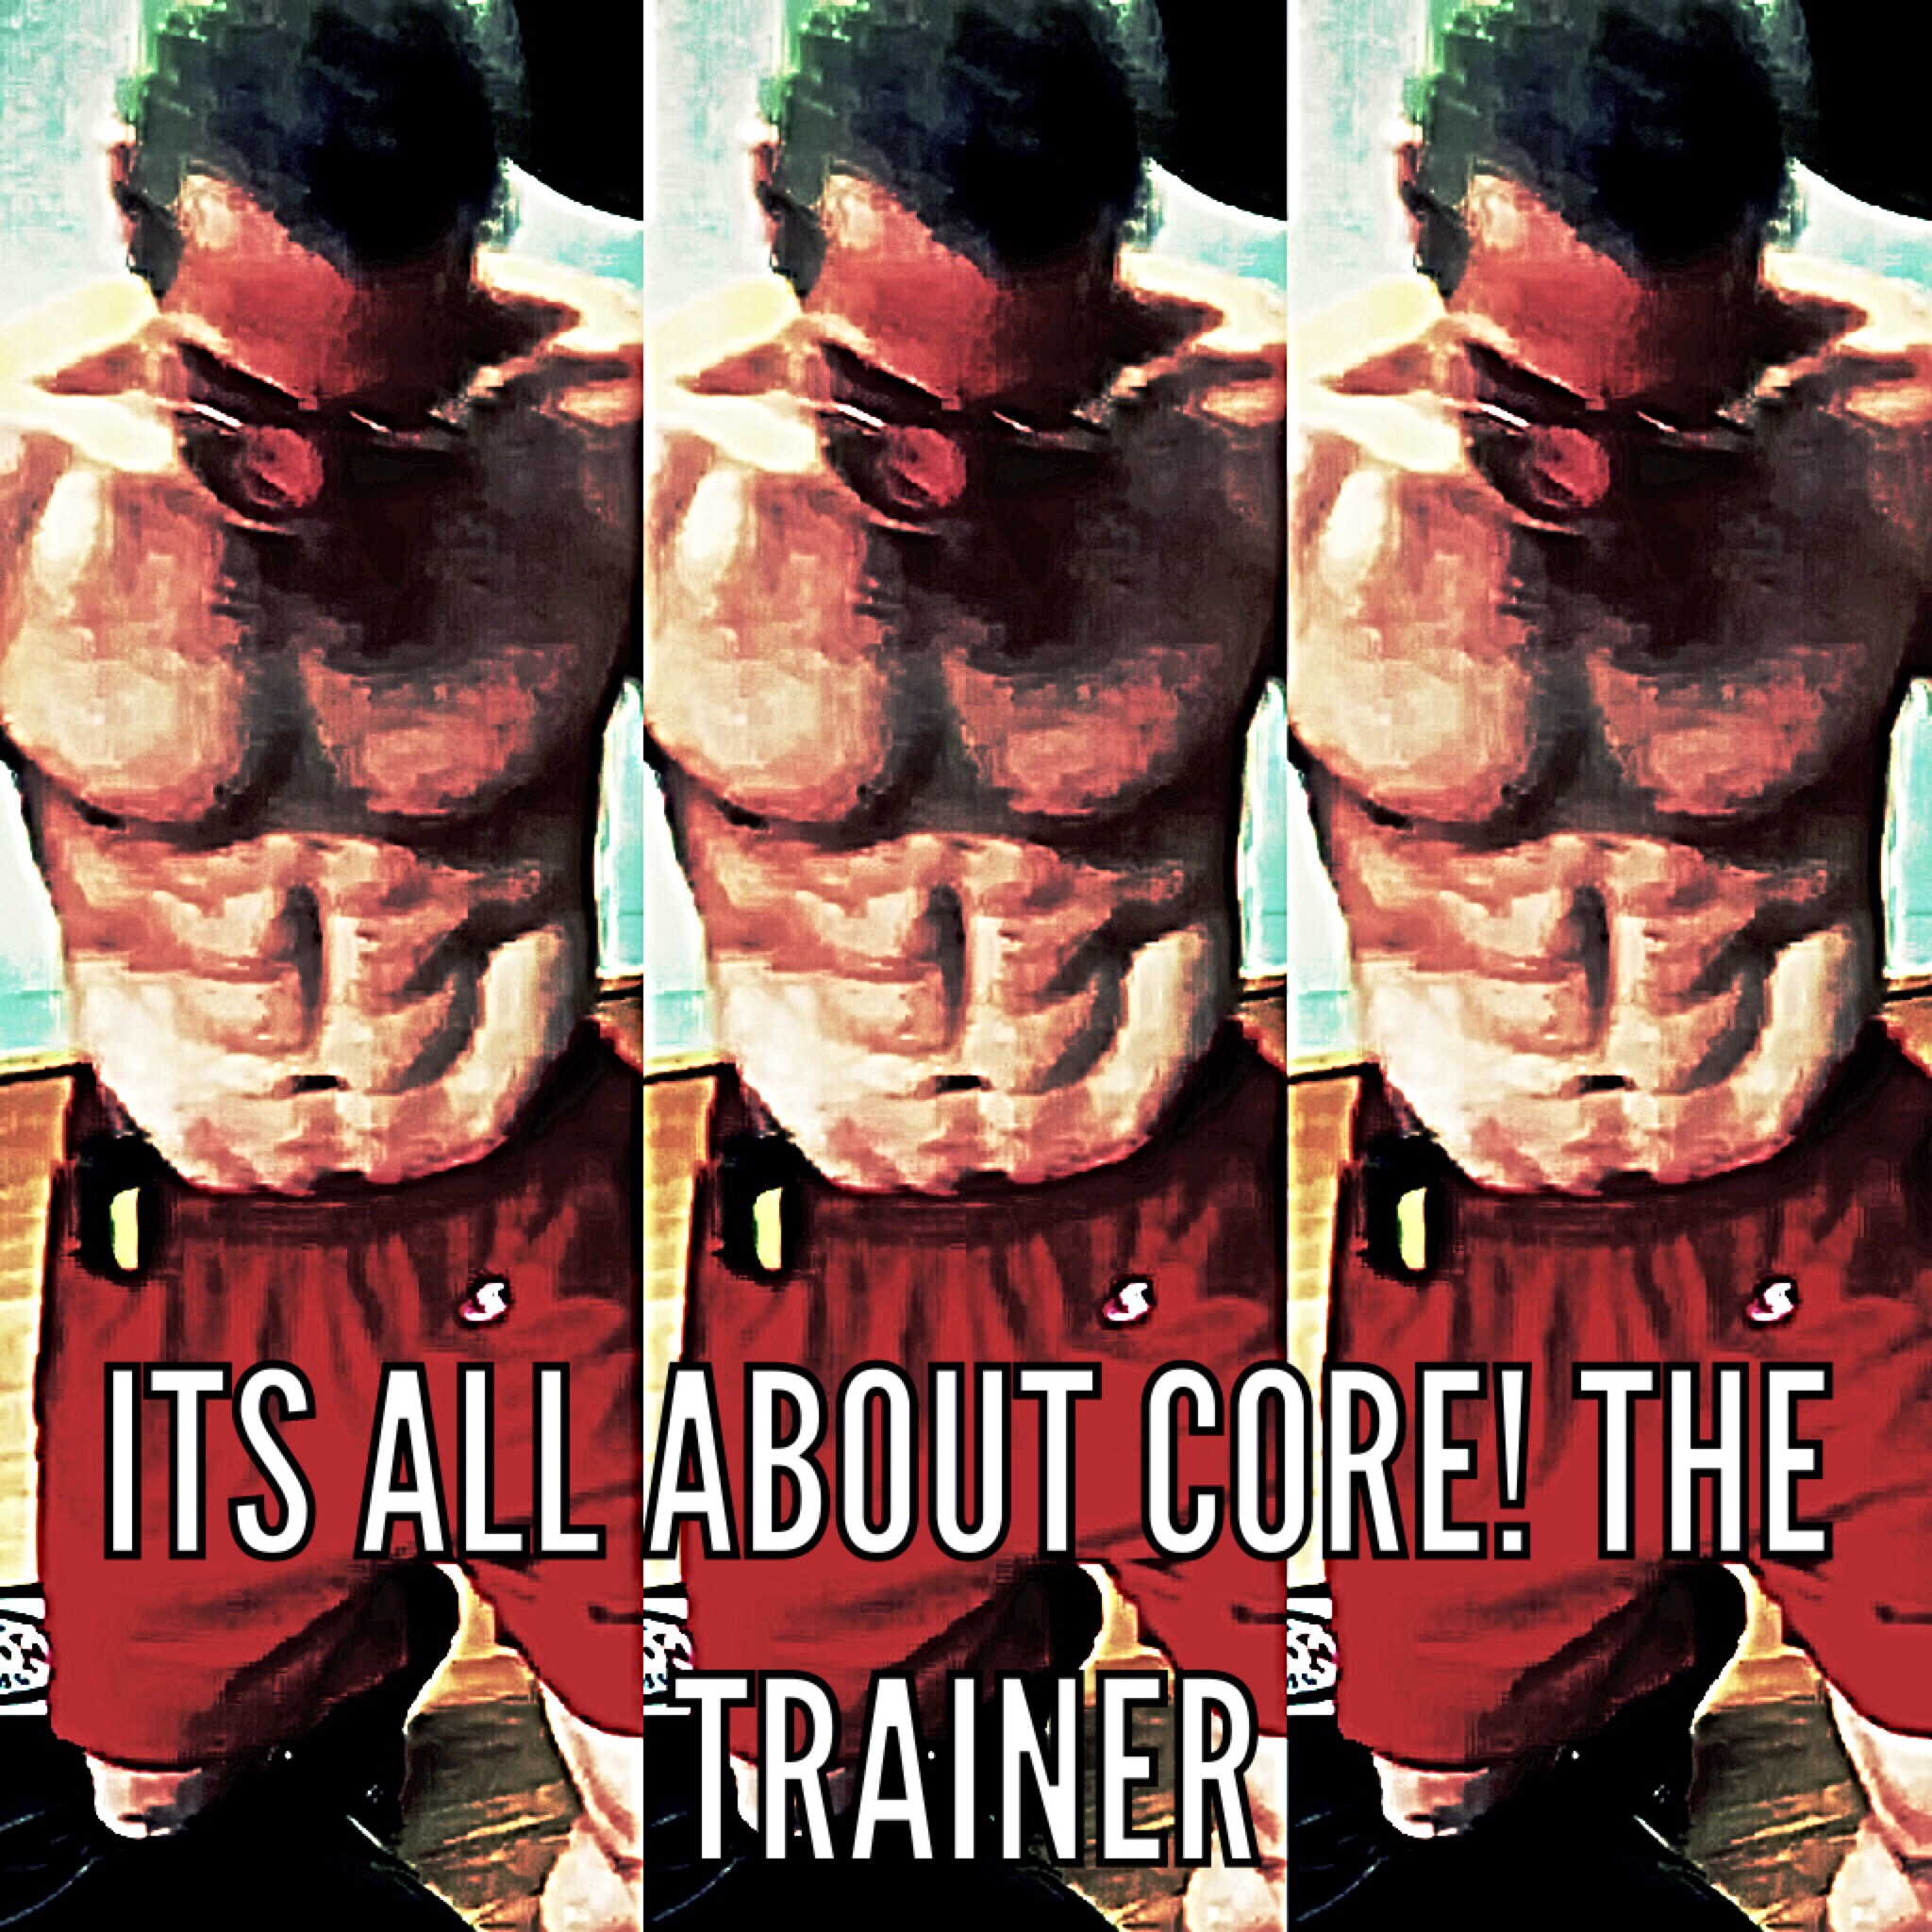 Think “Core”! The Trainer 